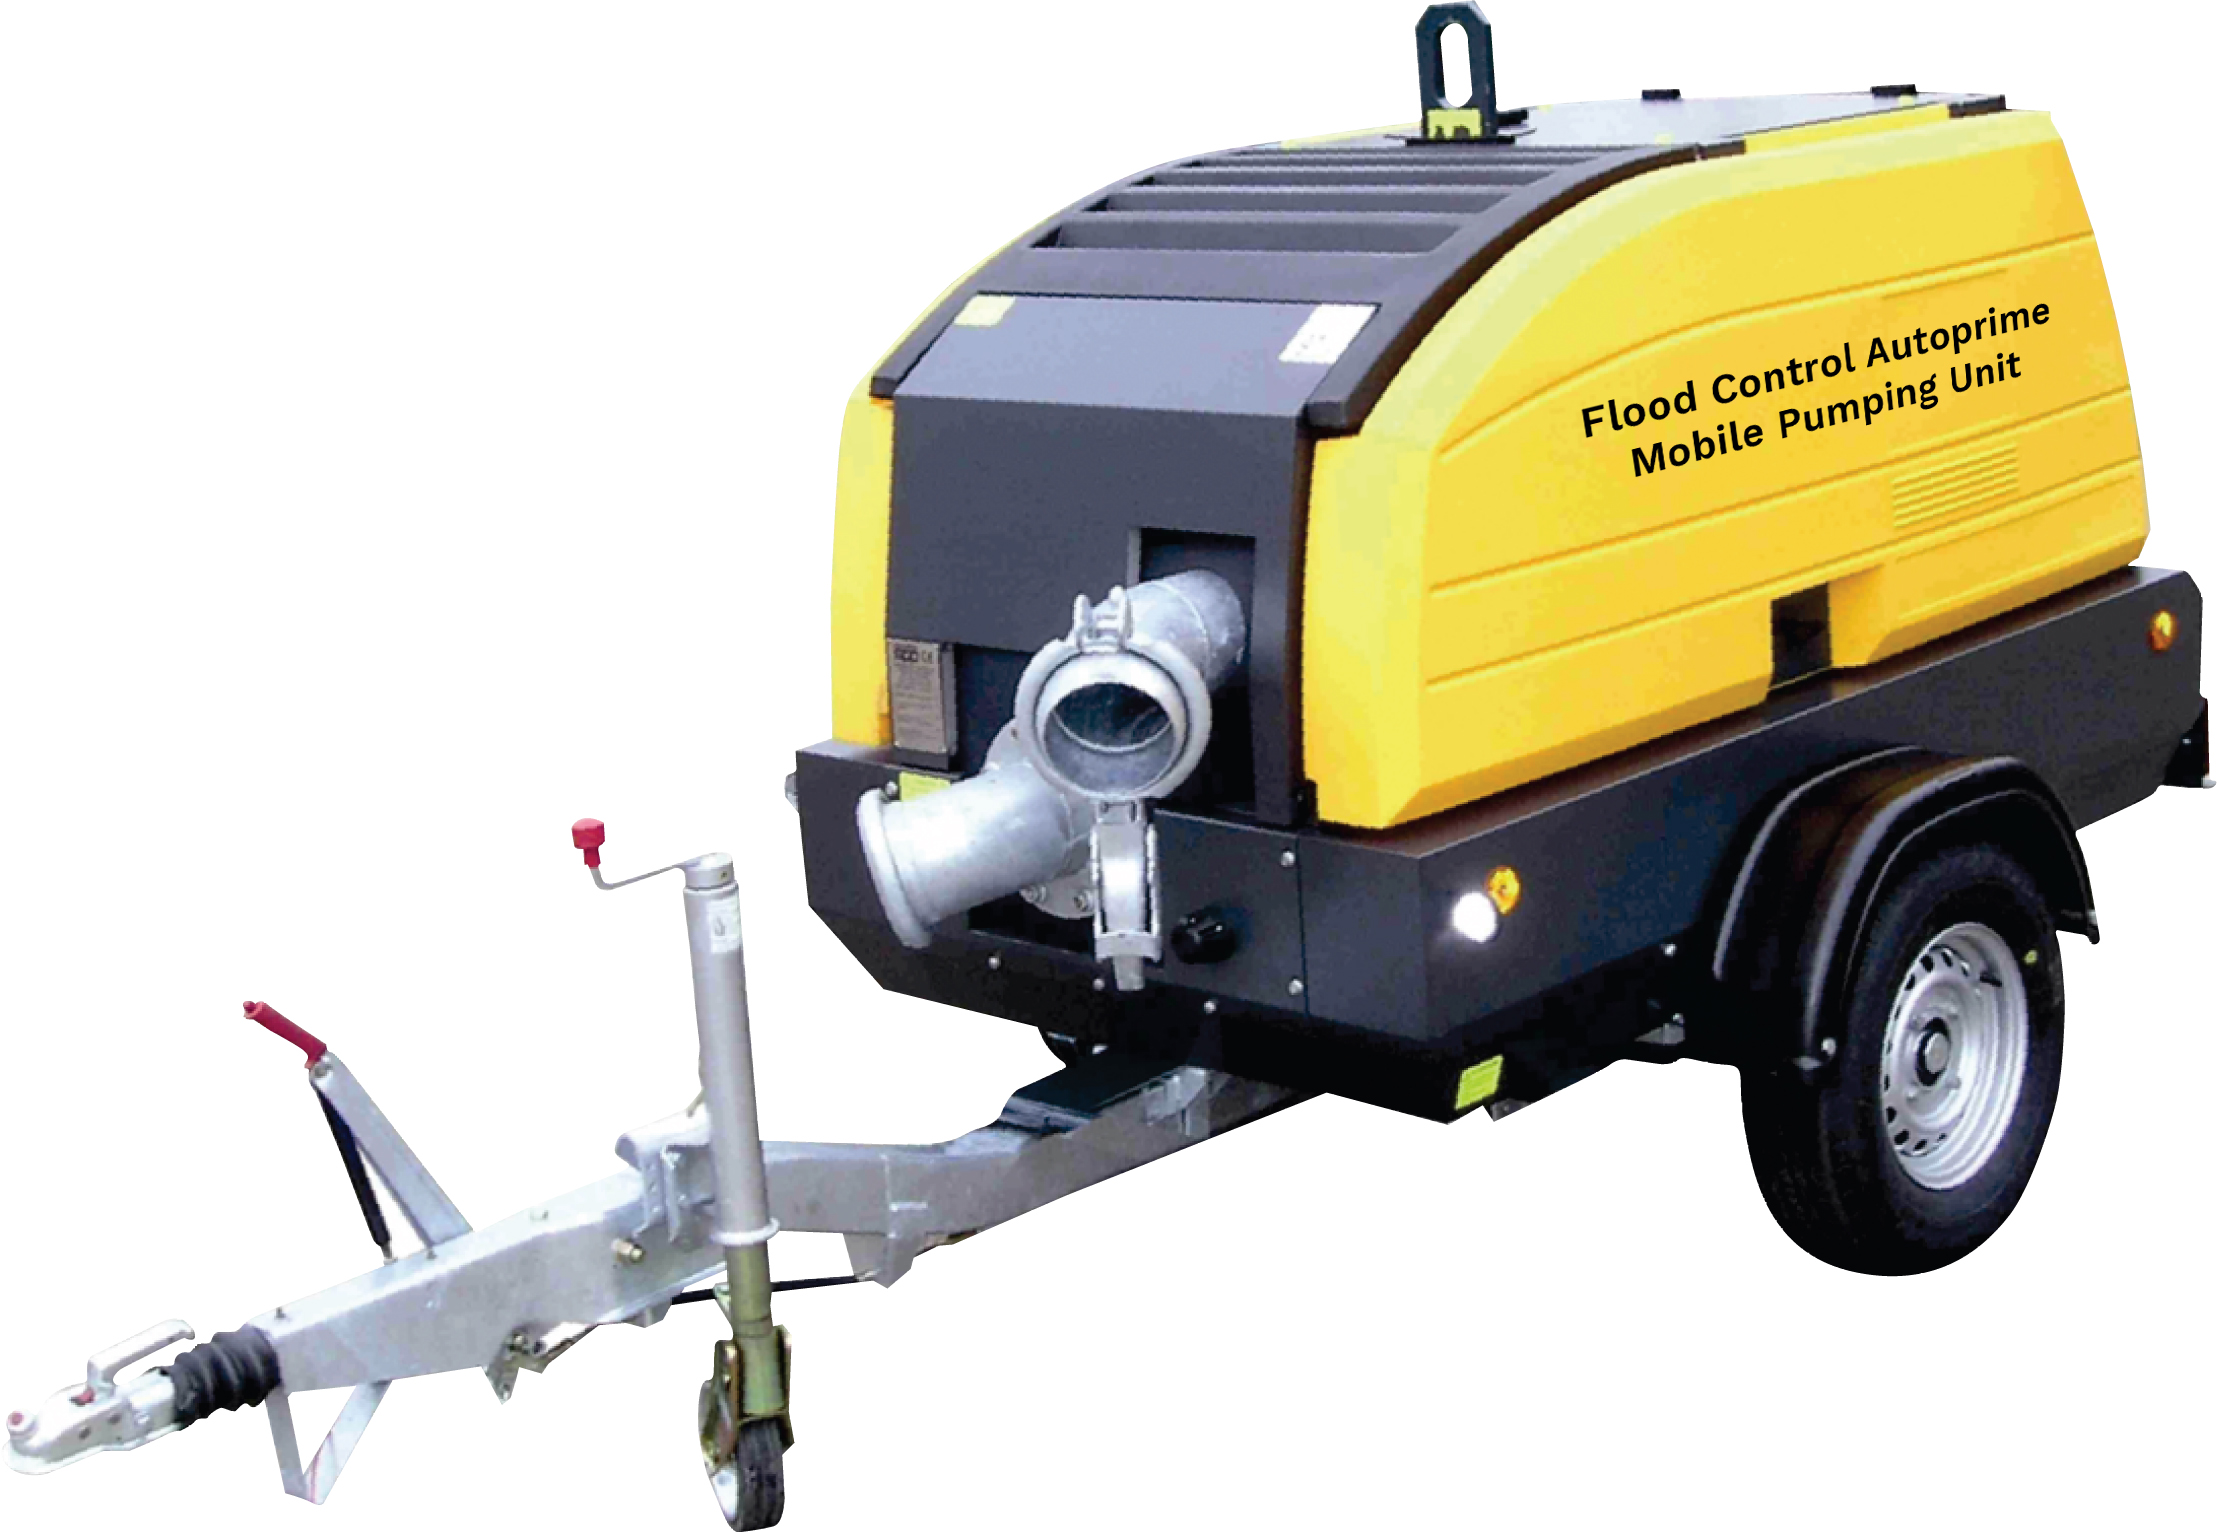 Autoprime pump sets are the largest-ever portable pump sets developed and supplied by KBL for flood control and drainage applications in the Indian subcontinent.